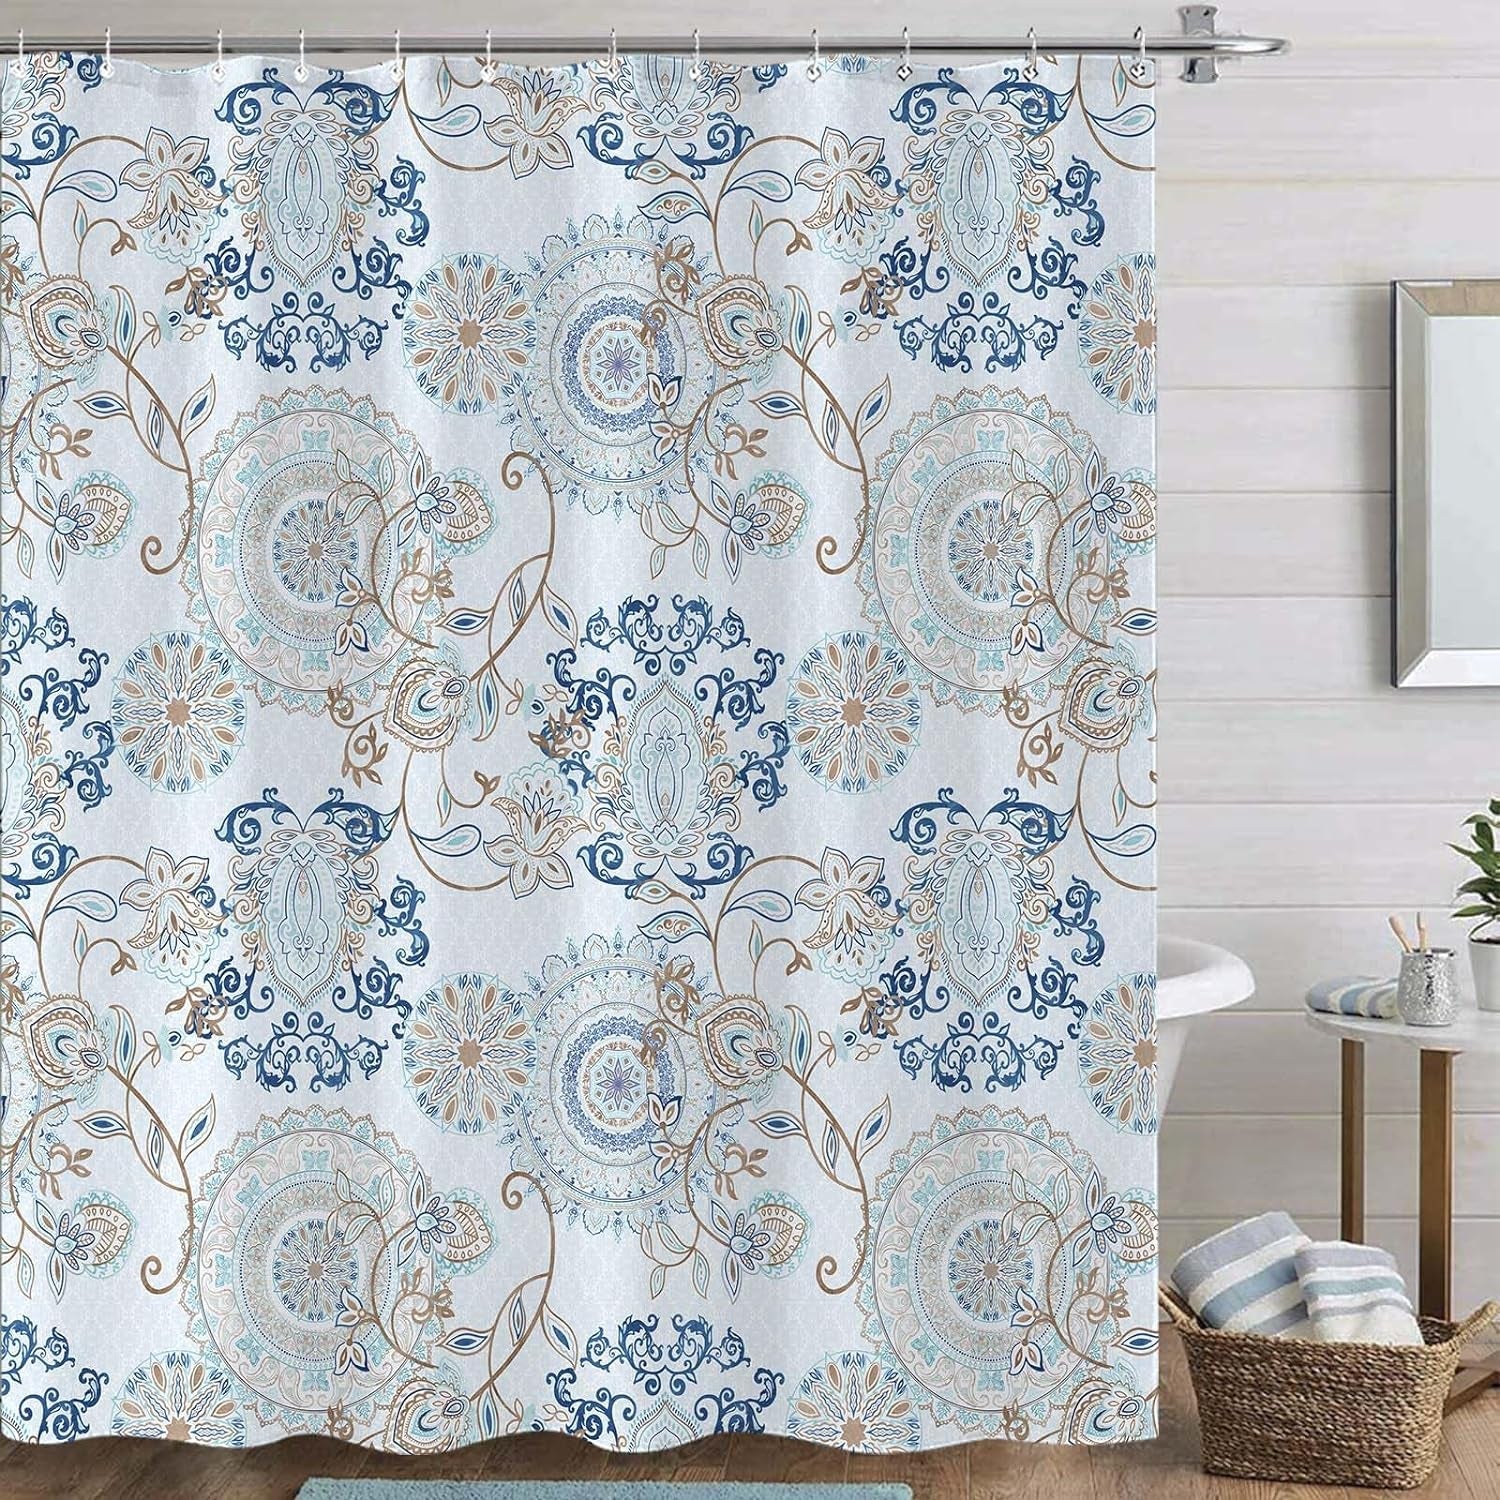 Light Blue and Navy Paisley Shower Curtain, Cool Teal Design Floral Bathroom Curtain Shower Curtains 72×72 Inches